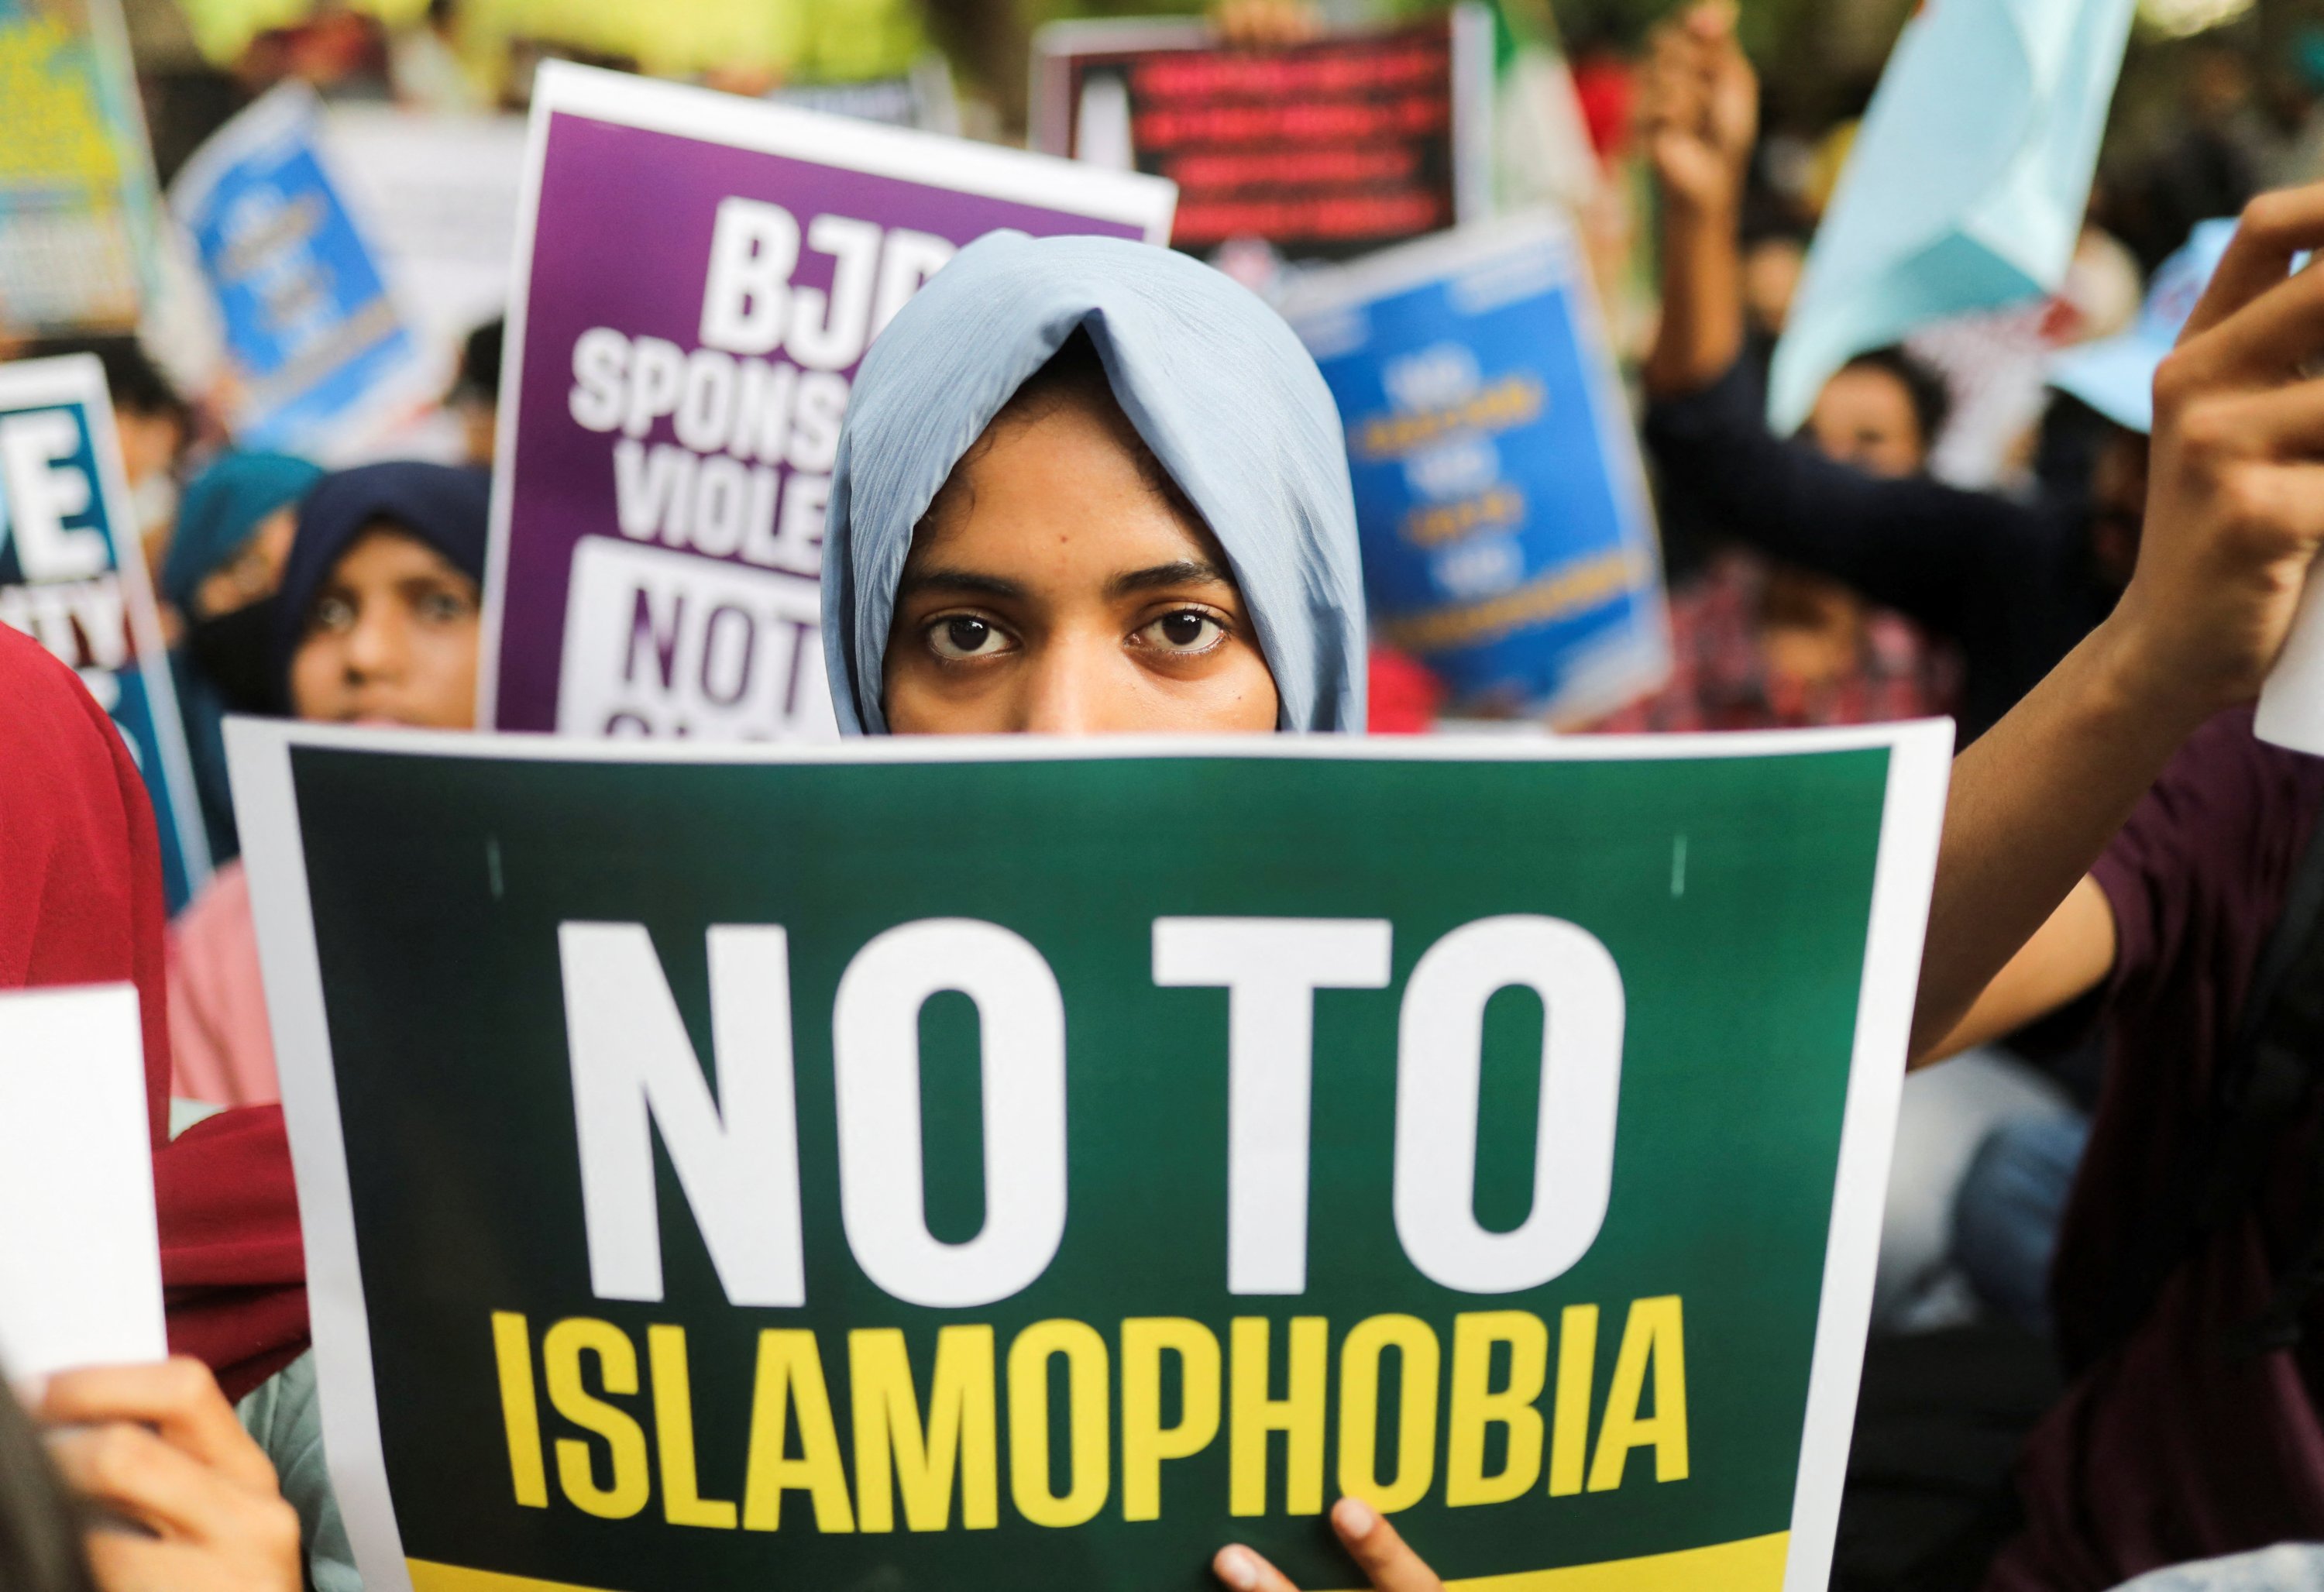 Indian Muslims protest govt amid growing anti-Islam sentiment | Daily Sabah